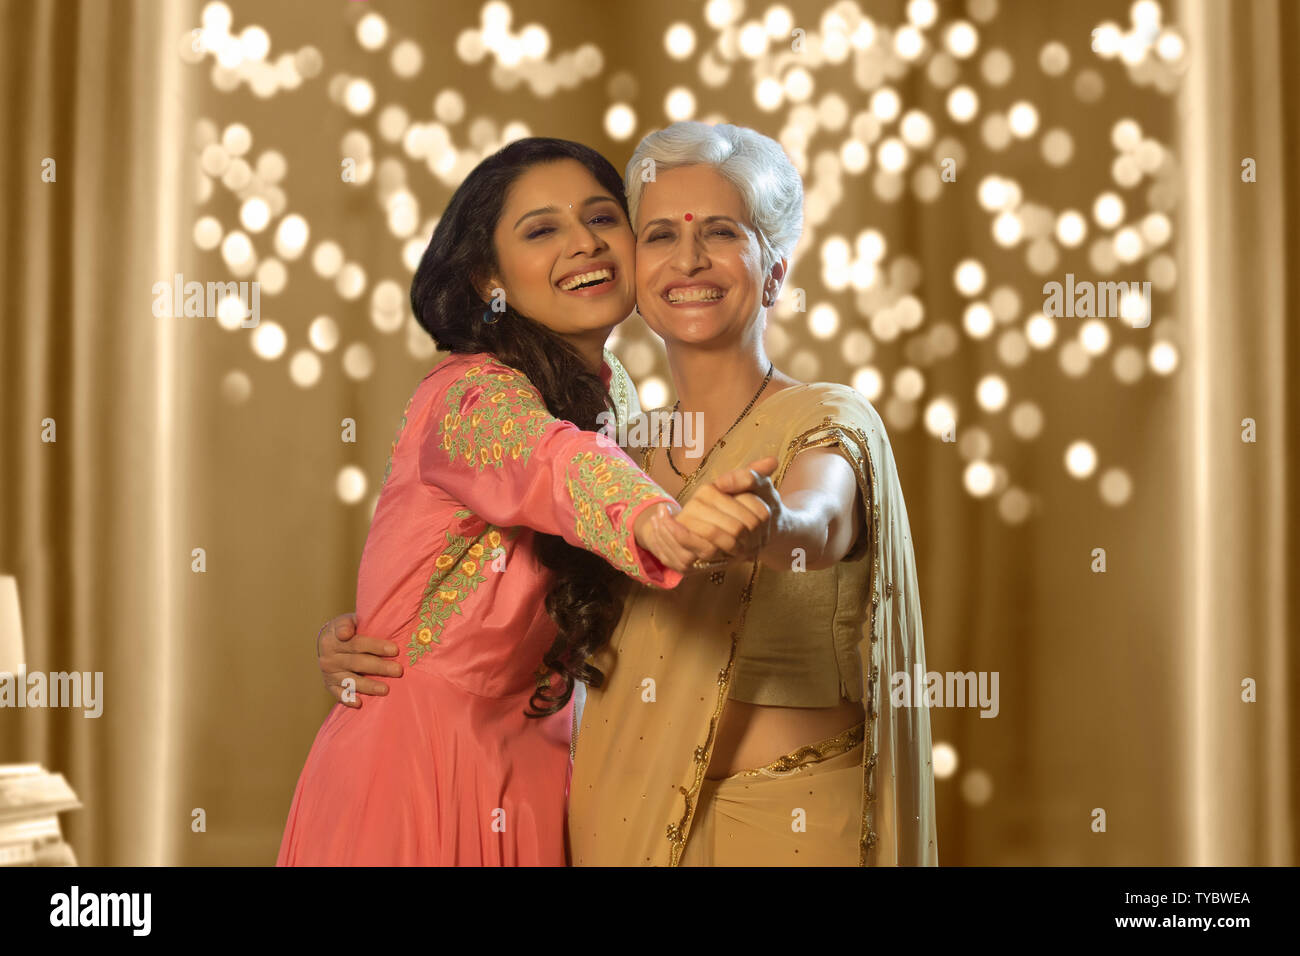 10 Adorable Mother-Daughter Poses You Should Get Clicked On Your Wedding  Day! | Mother daughter poses, Mother daughter photography, Mother daughter  pictures